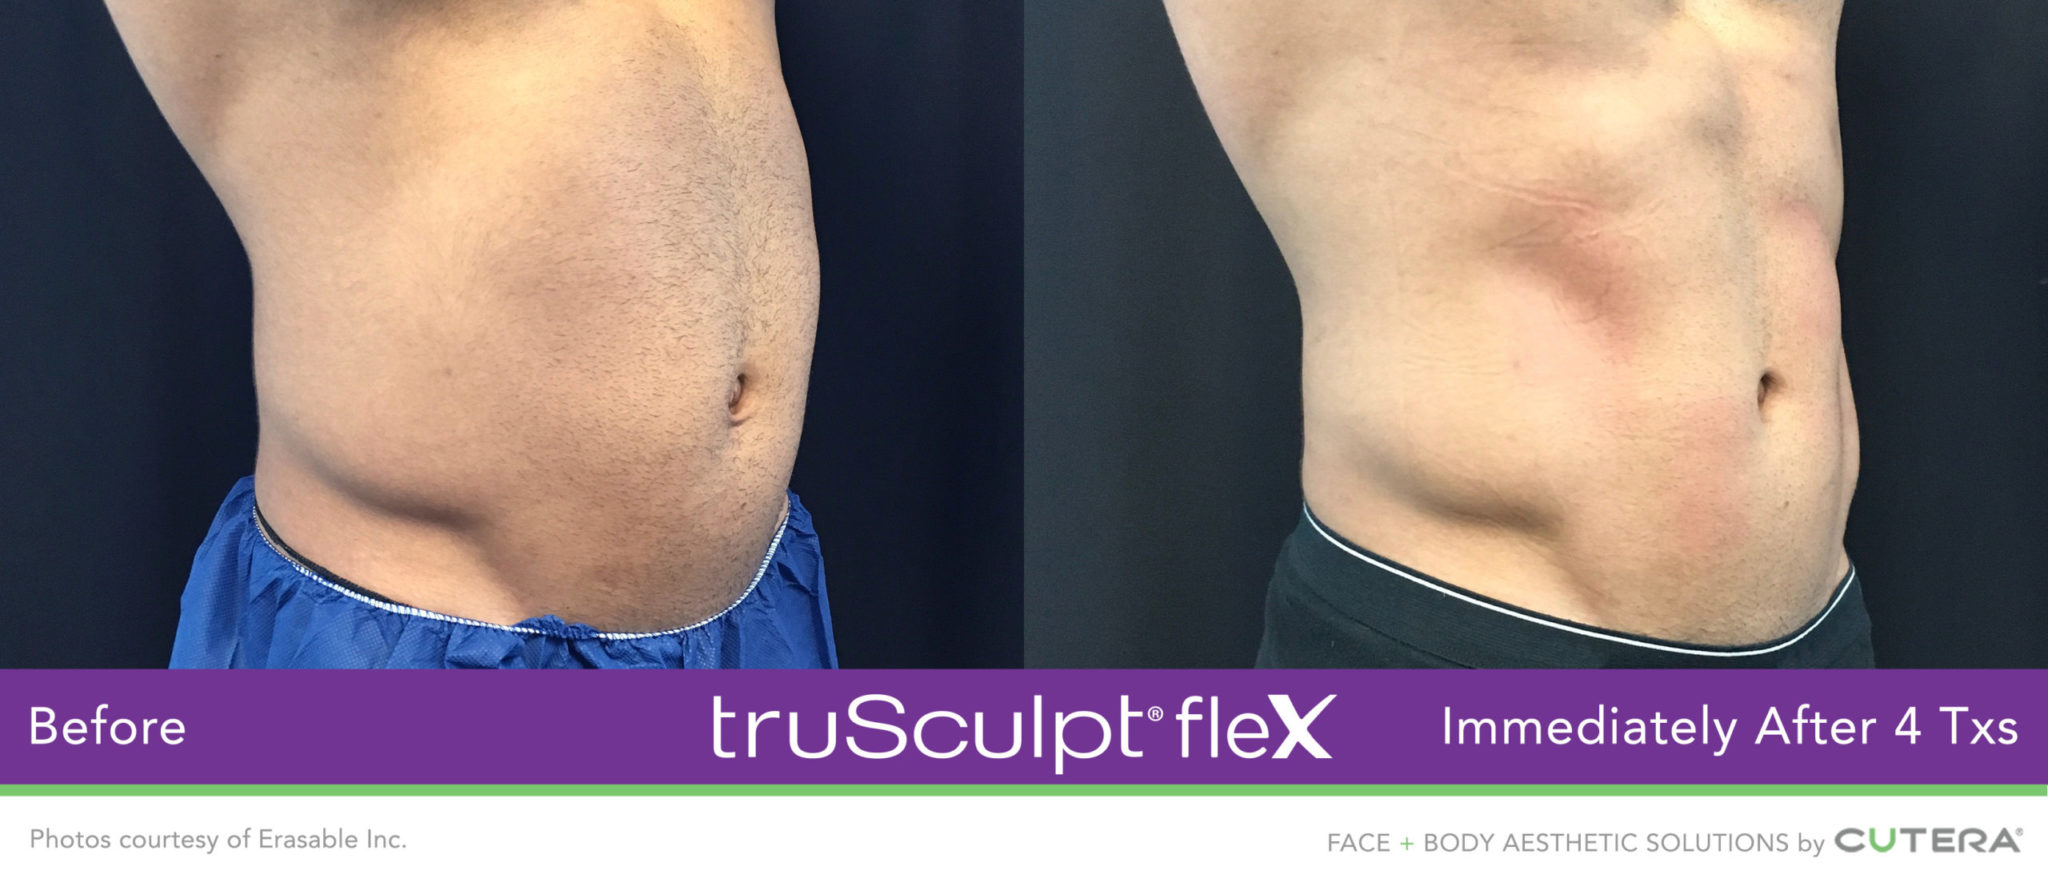 Body contouring with TruBody, Men